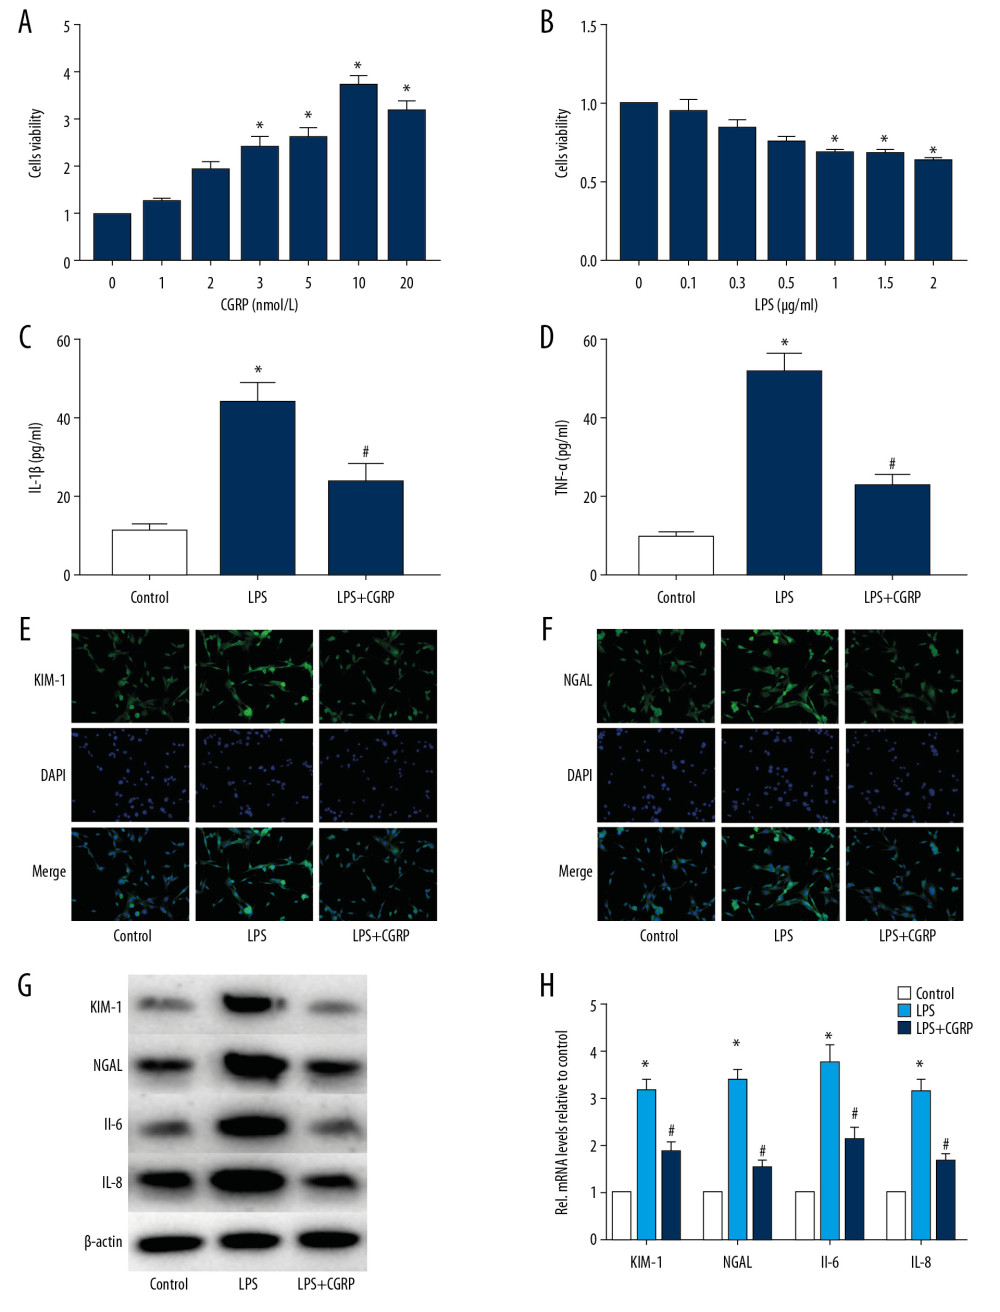 CGRP attenuates LPS-induced damage to HK-2 cells. (A) CCK8 assay of CGRP; (B) CCK8 assay of LPS; (C, D) ELISA results of IL-1β and TNF-α; (E, F) IF staining results of KIM-1 and NGAL (magnification×400); (G, H) Western blot and RT-PCR results of KIM-1, NGAL, IL-6 and IL-8. (* P<0.05 vs. the control group and # P<0.05 vs. the LPS group).